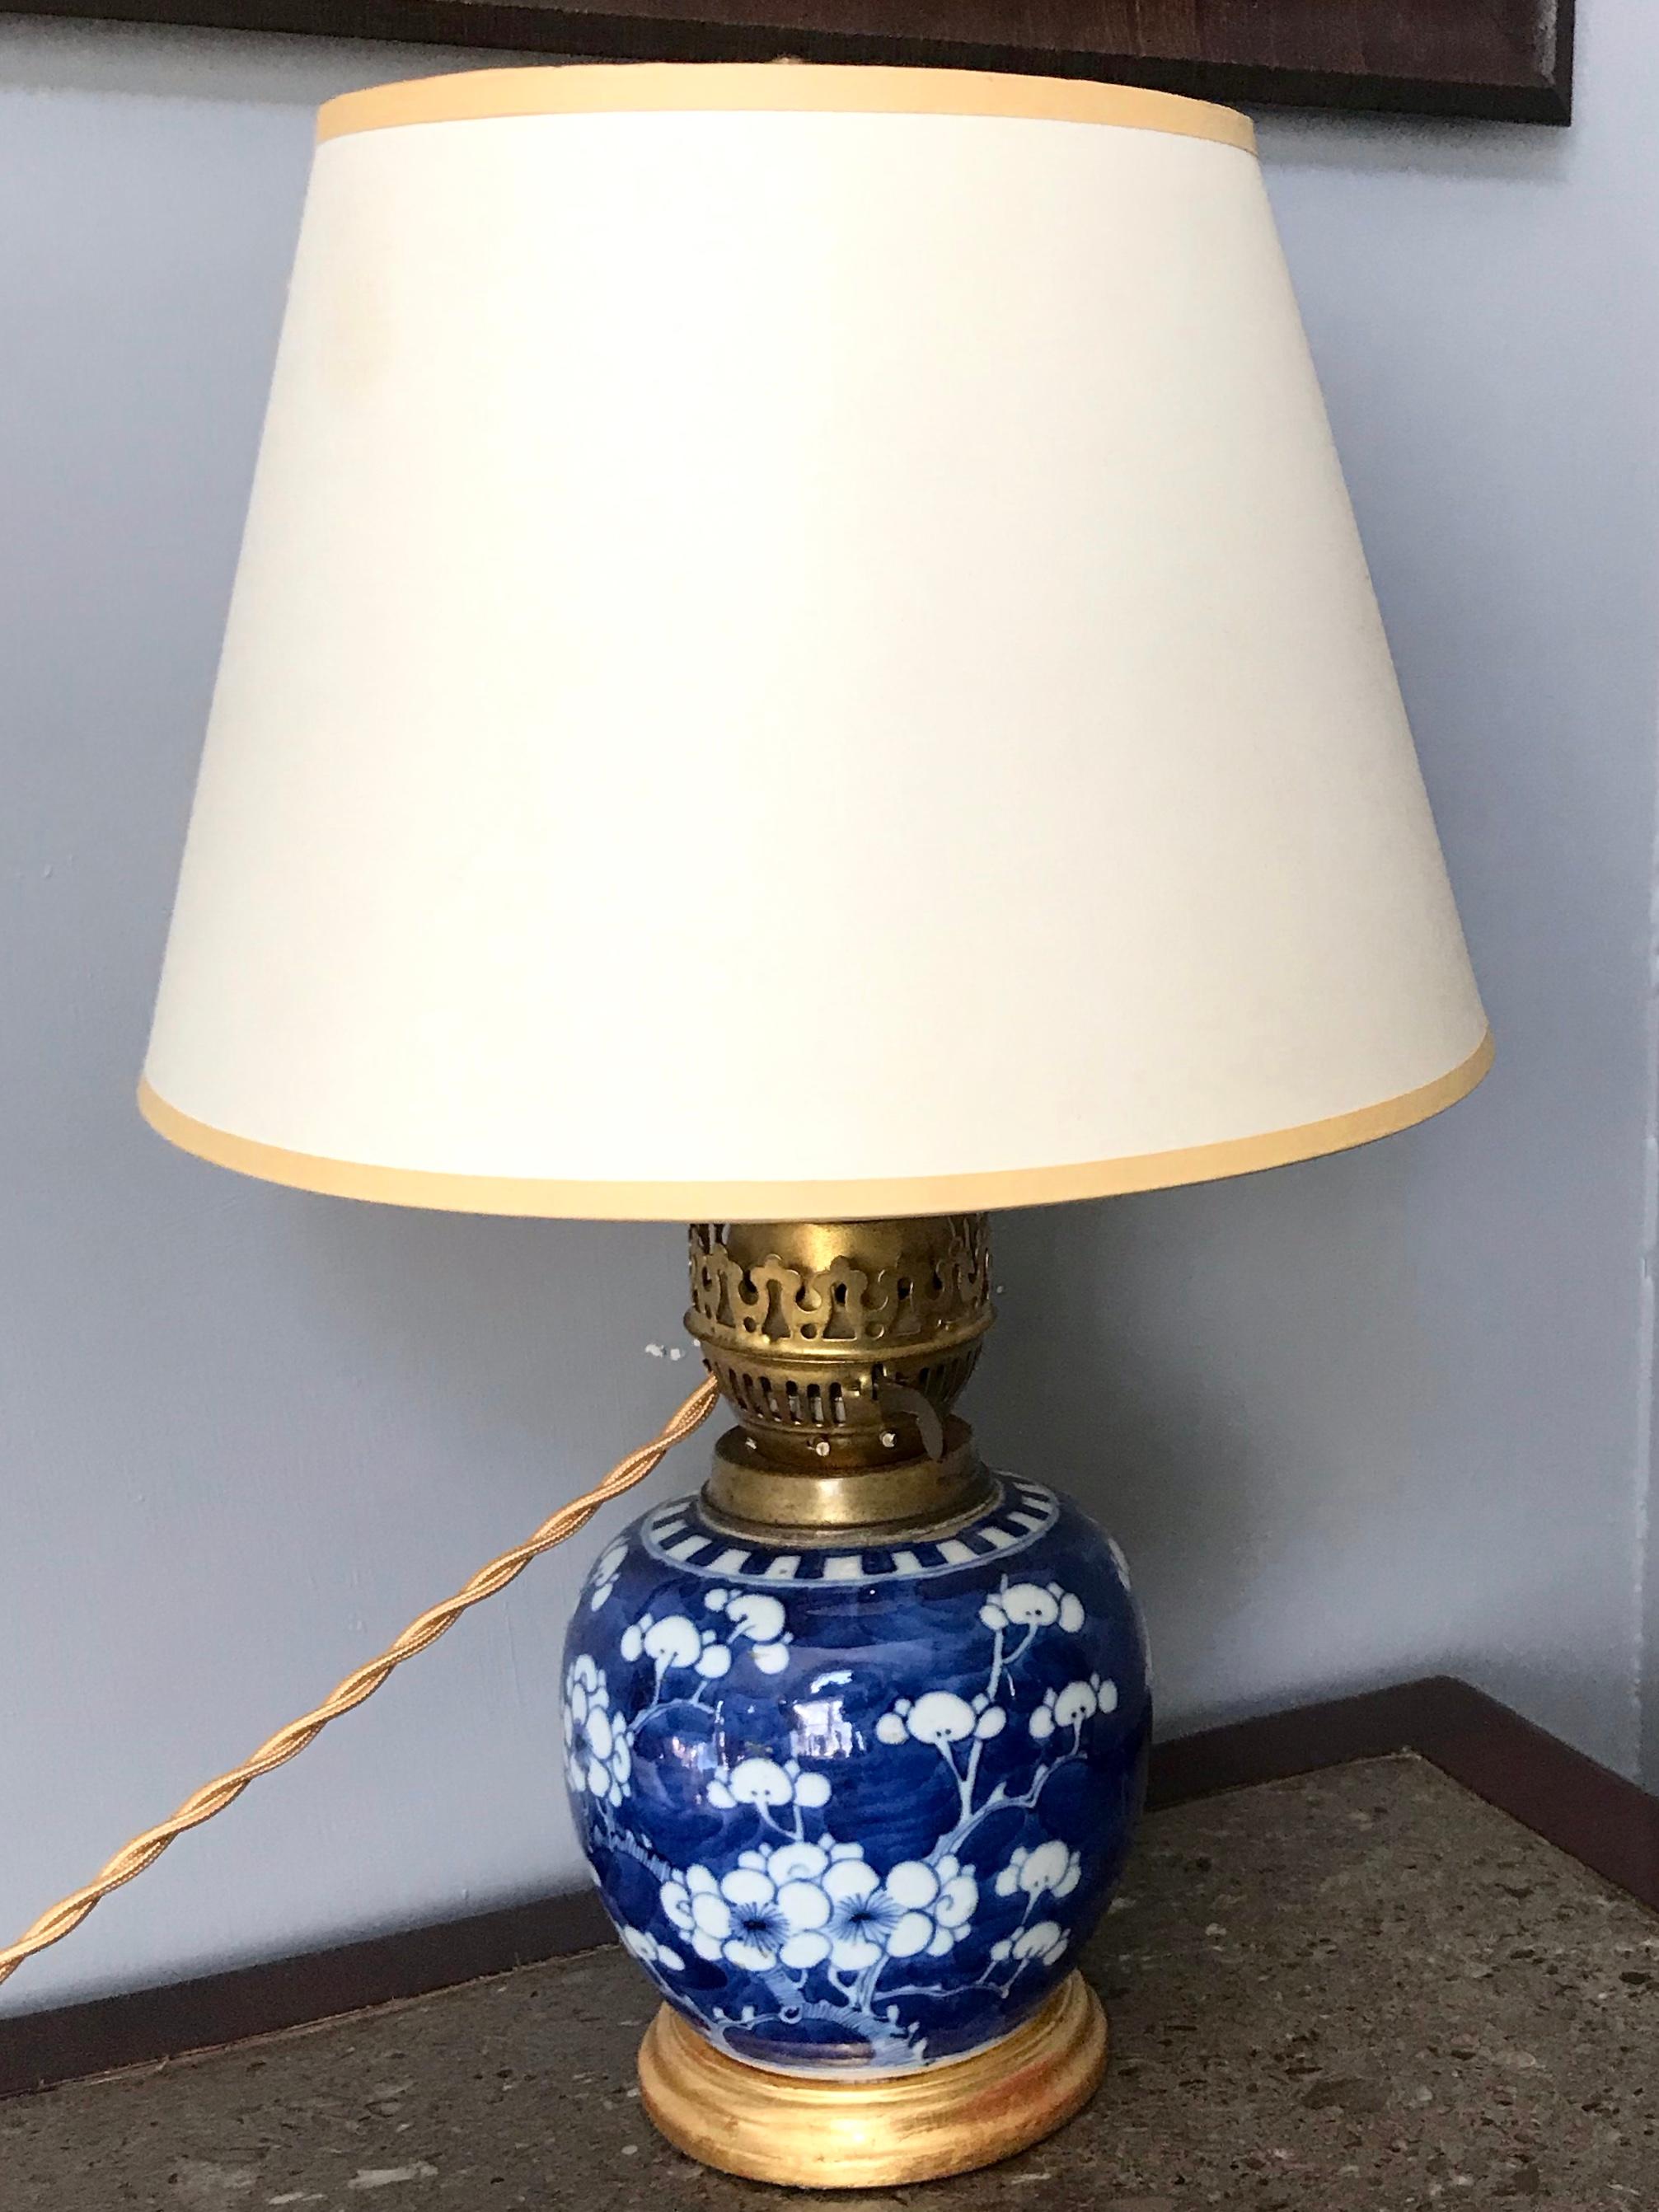 Chinese Export Blue and White Cherry Blossom Vase Lamp on Gilt Wood Base For Sale